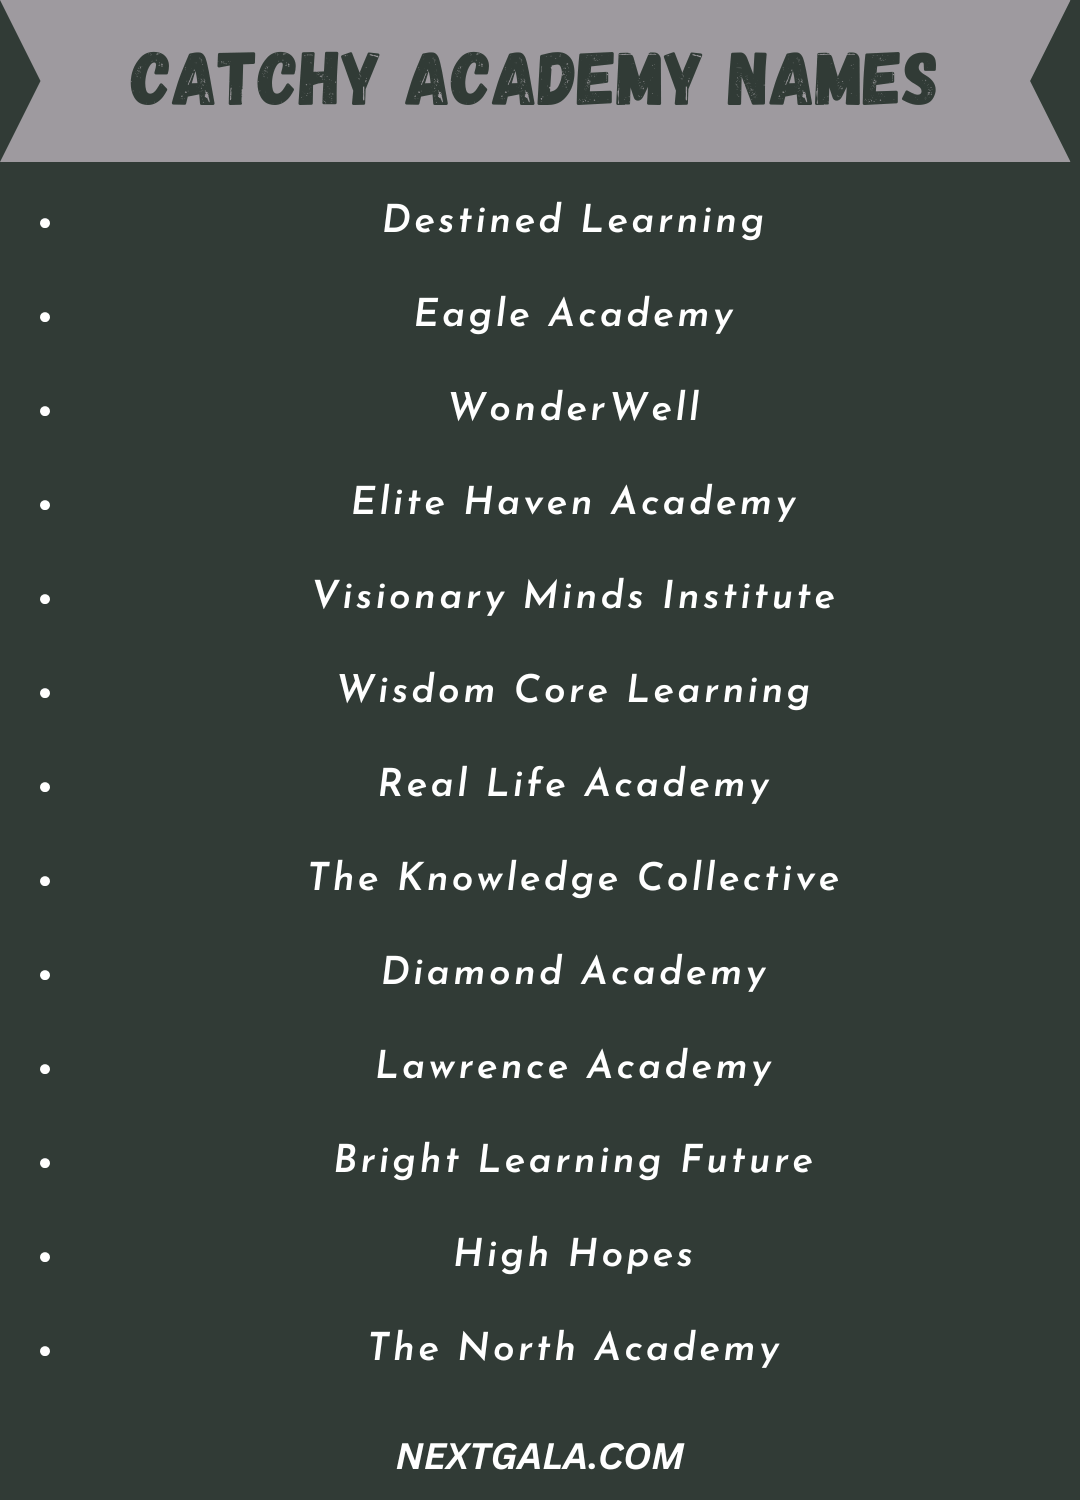 Catchy Academy Names